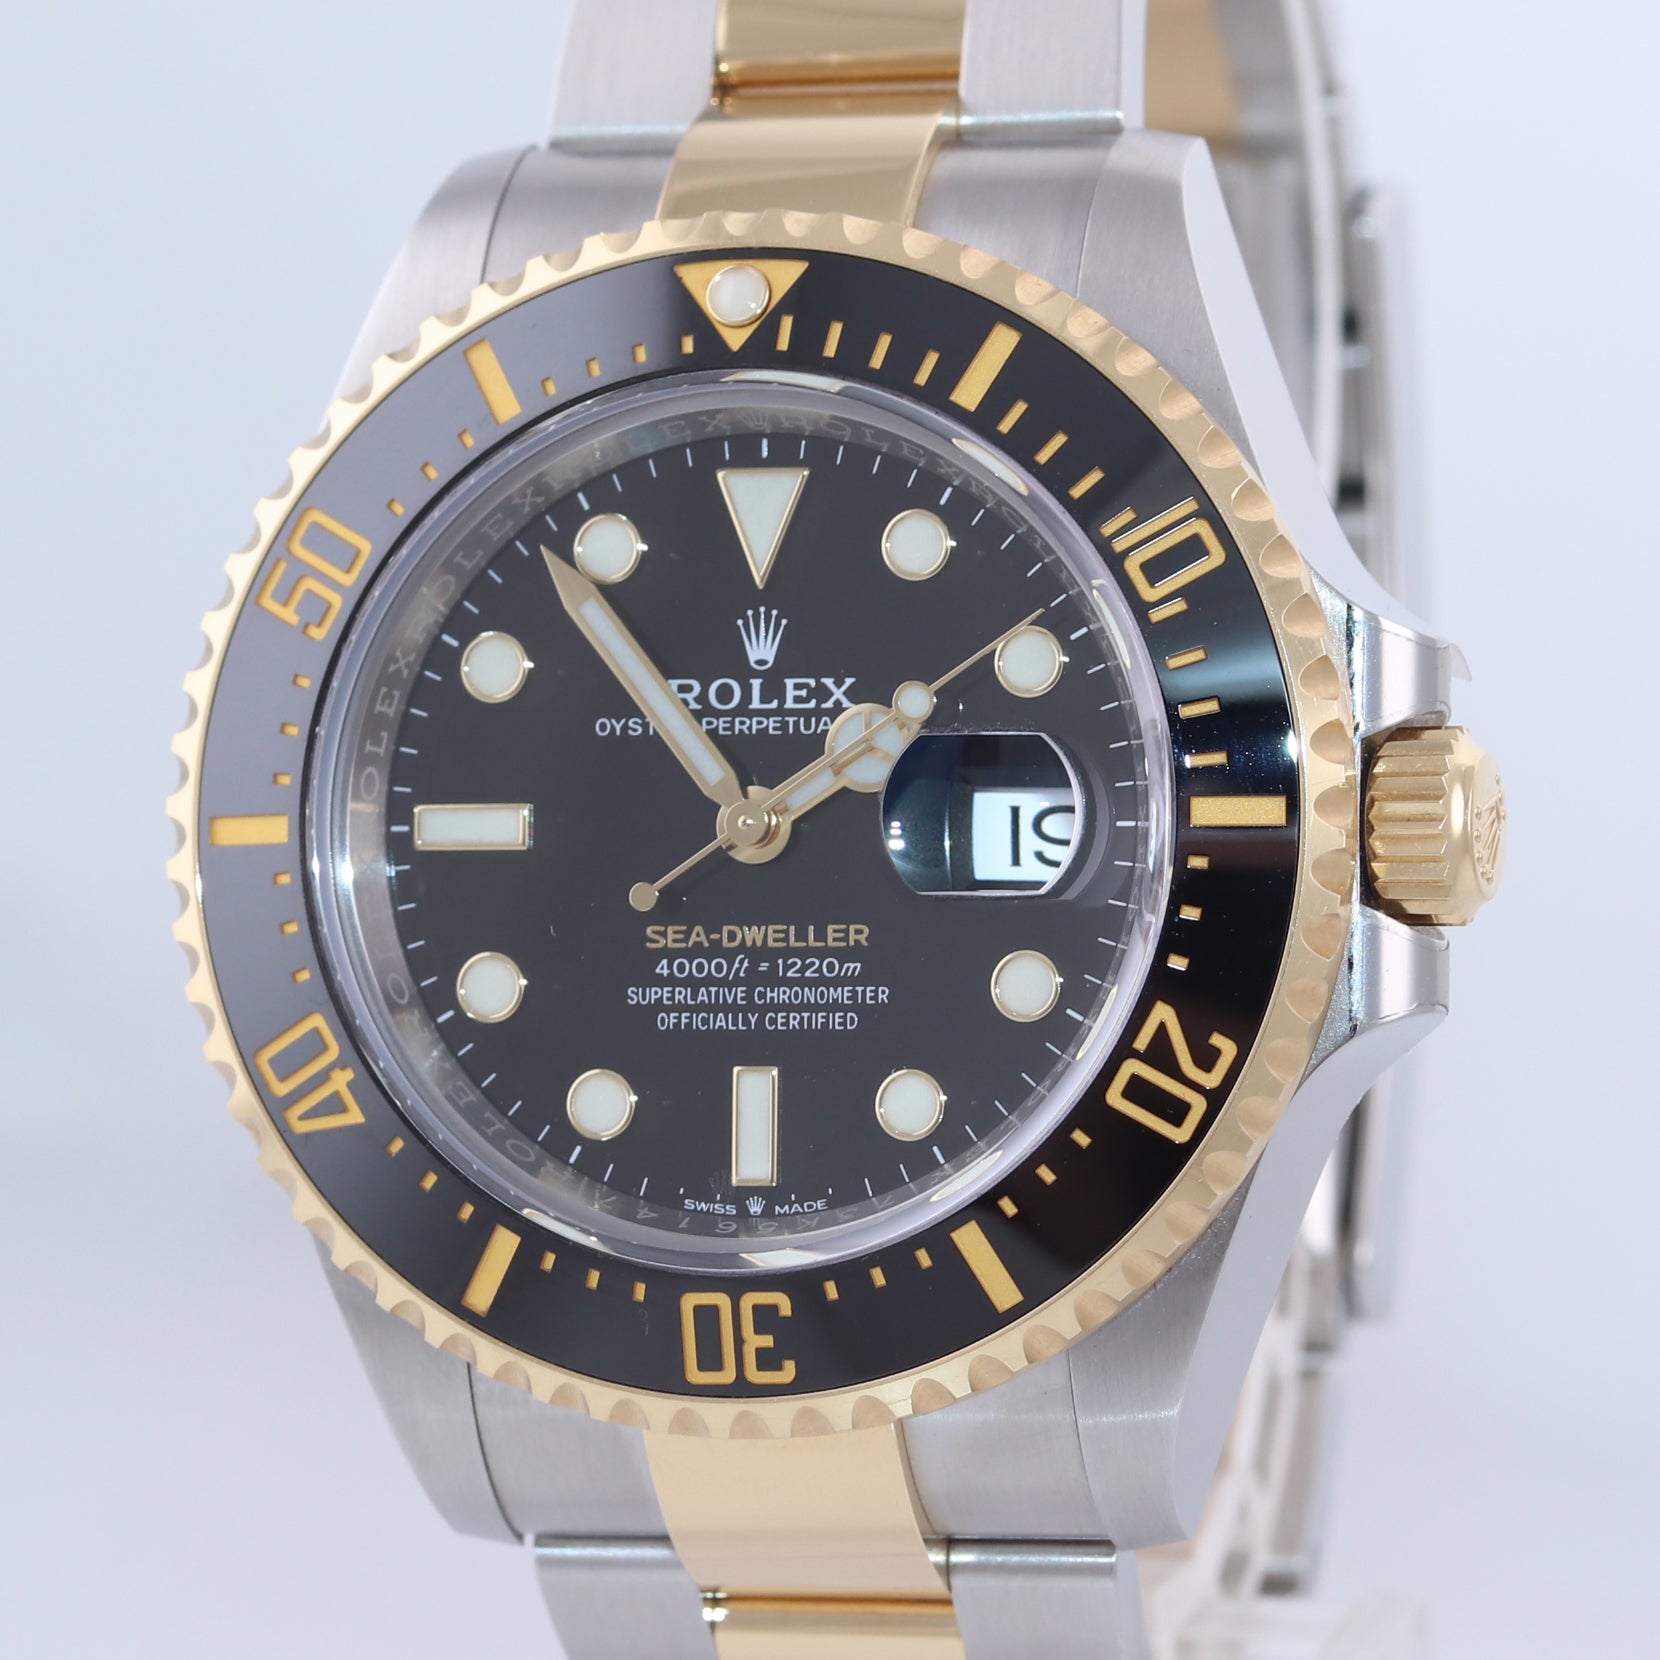 PAPERS 2019 Rolex Sea-Dweller 43mm Two-Tone 18k Yellow Gold Watch 126603 Box